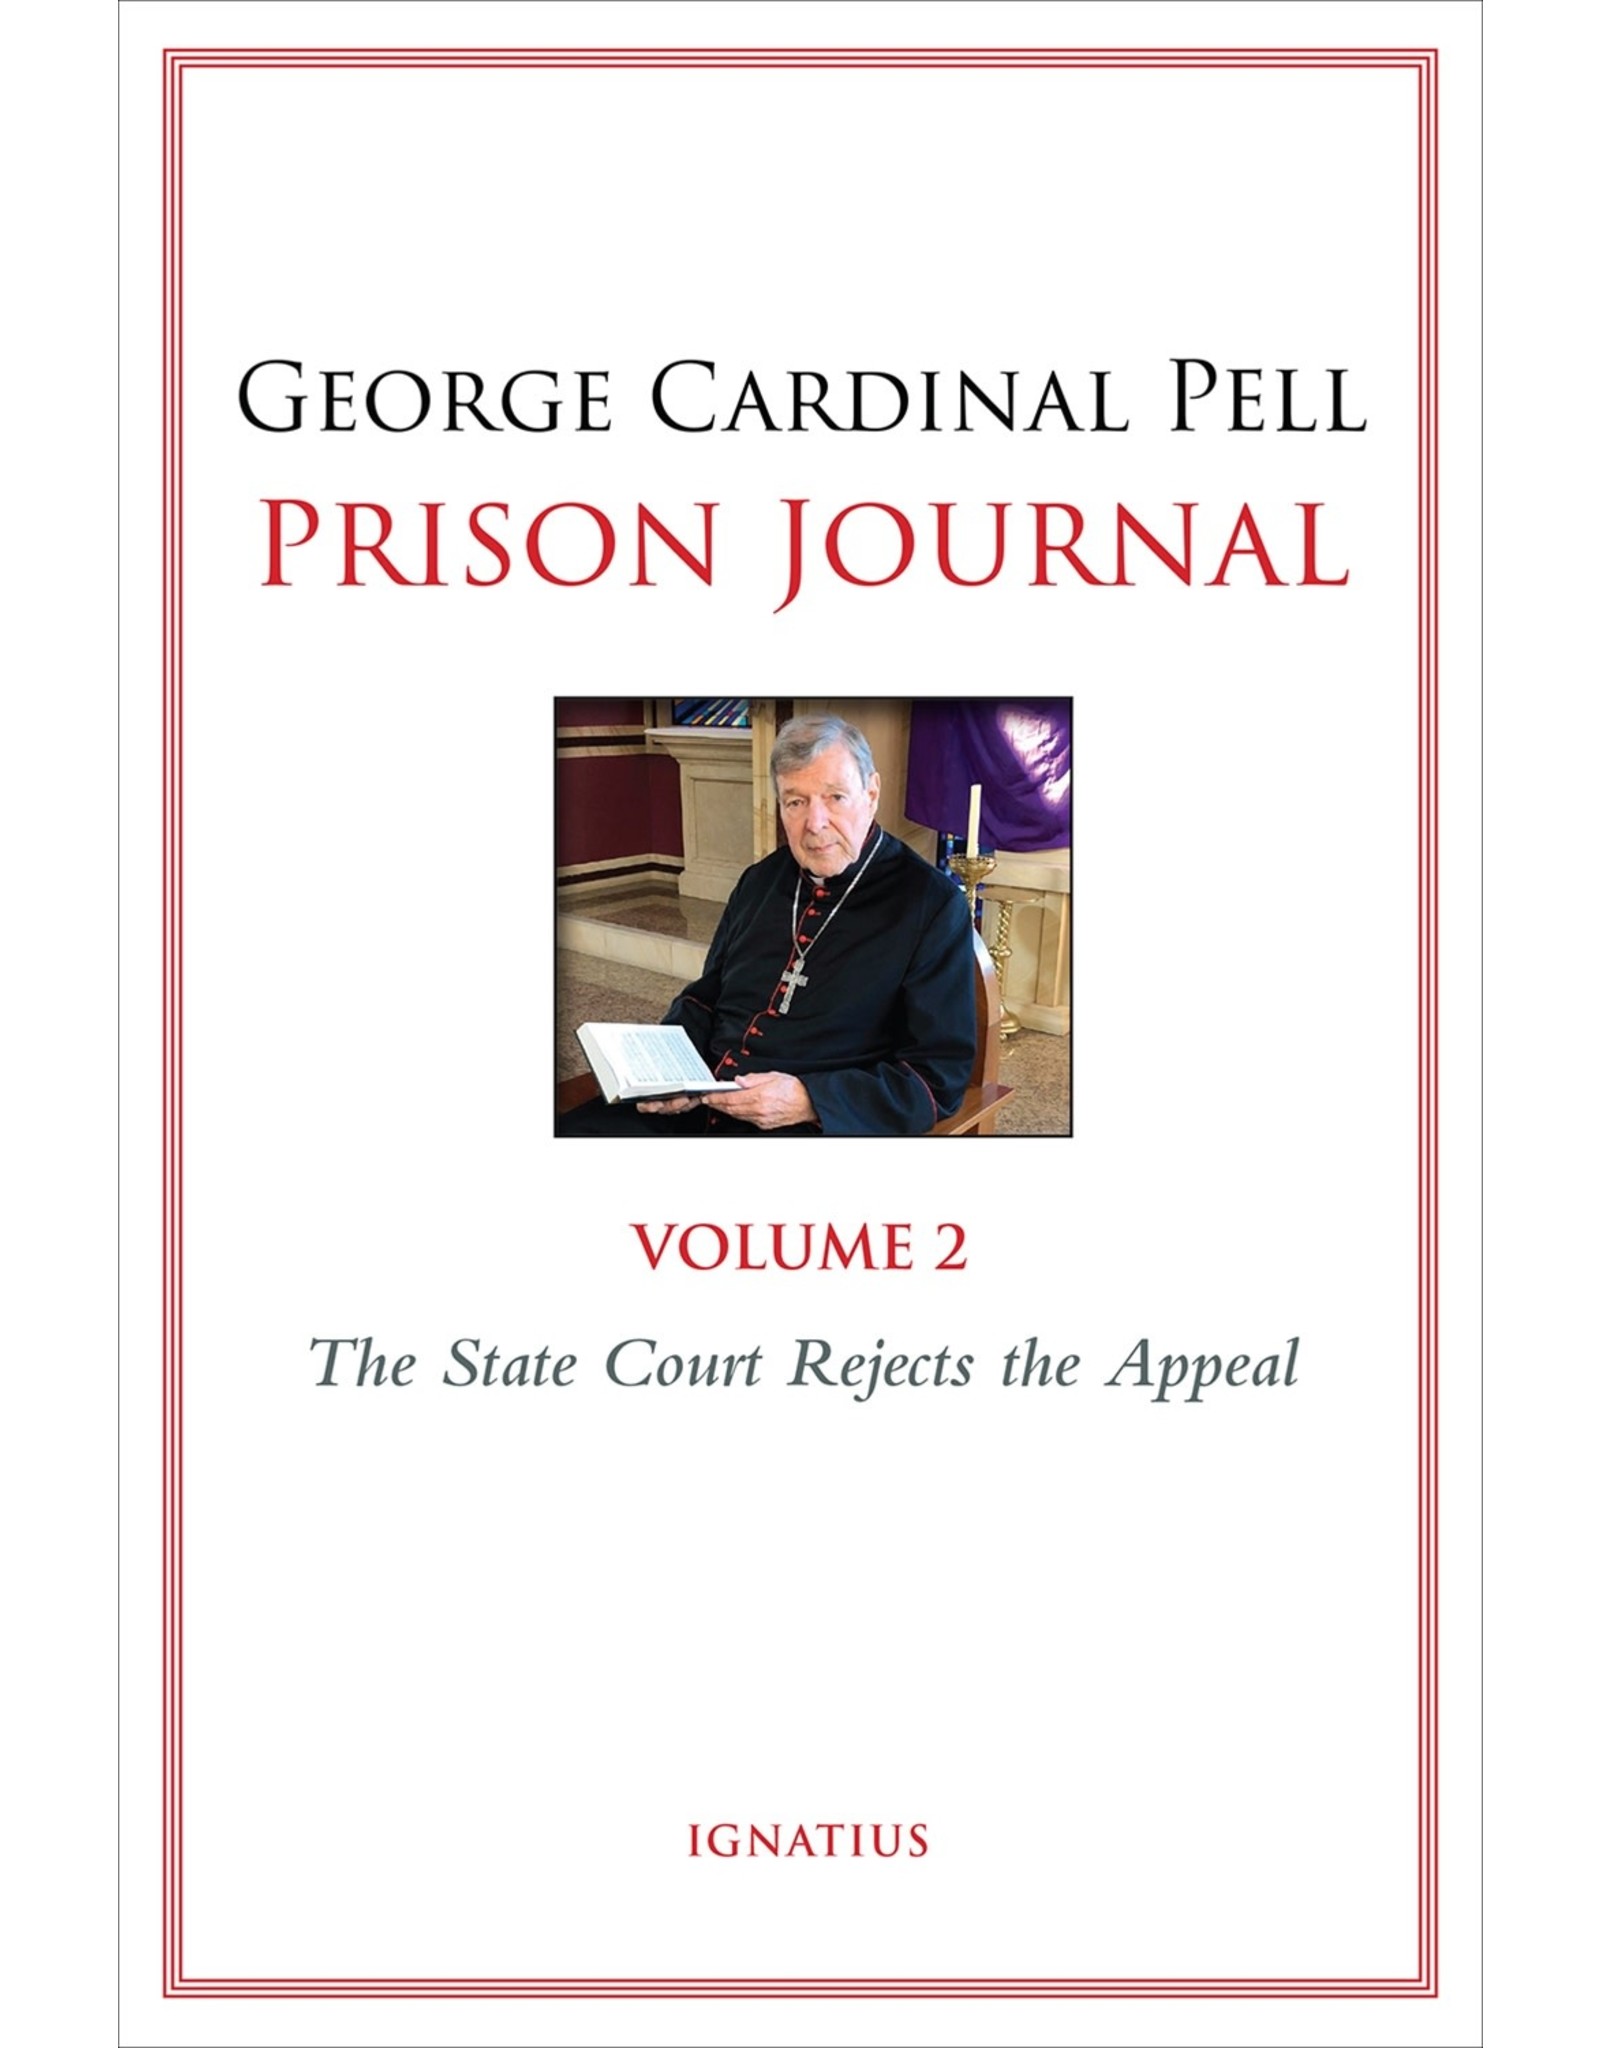 Prison Journal, Volume 2: The State Court Rejects the Appeal